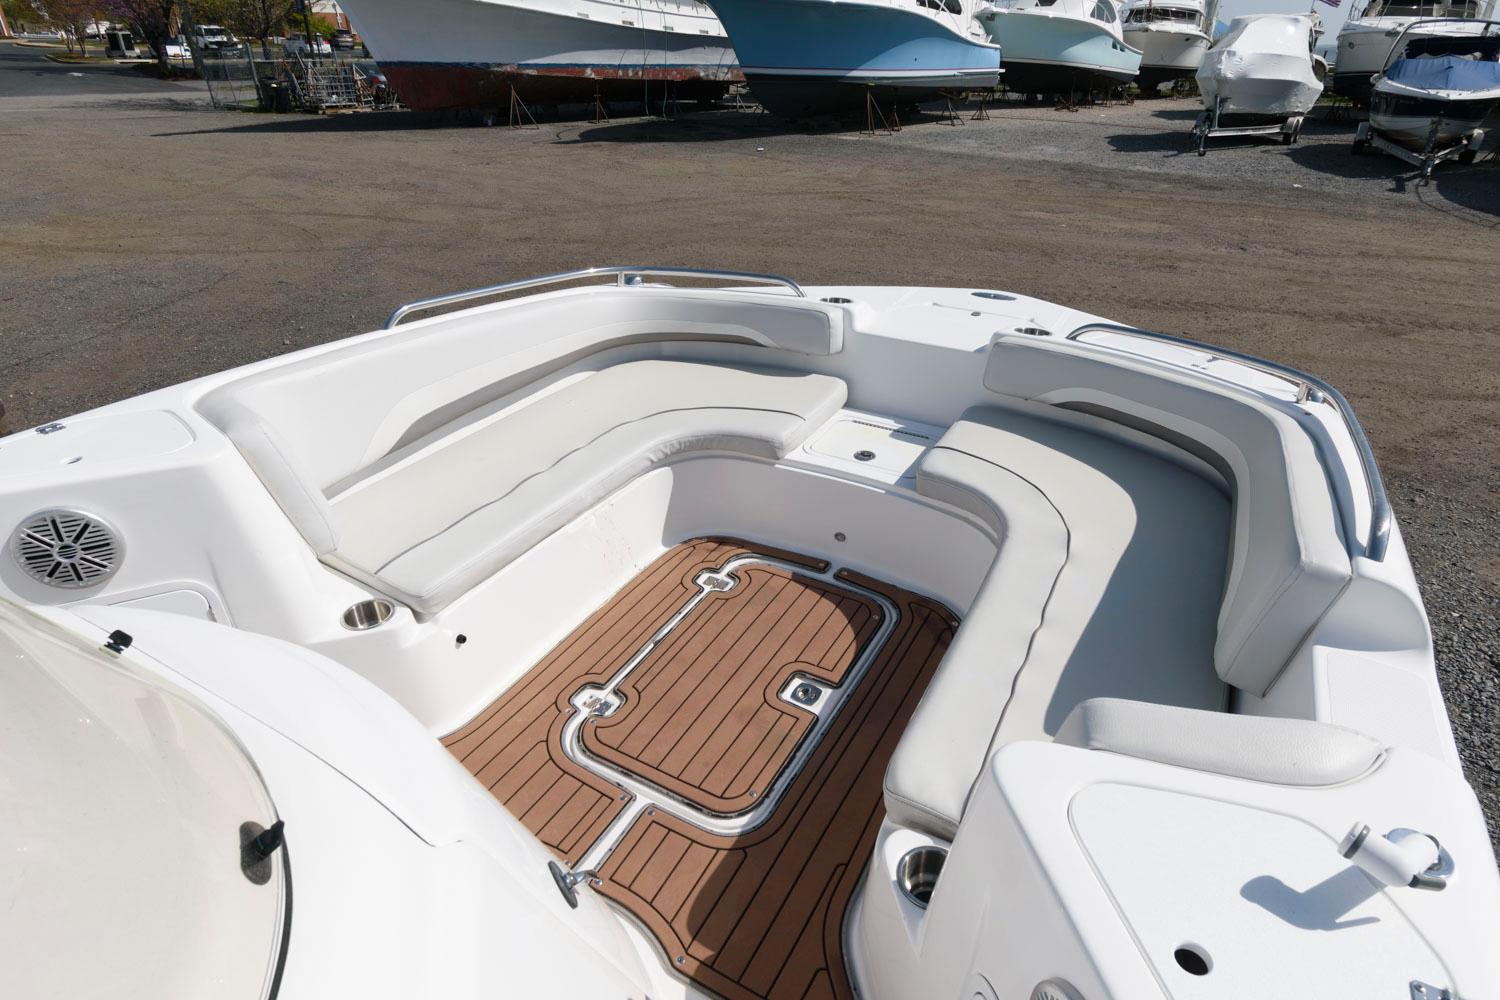 M 6889 MD Knot 10 Yacht Sales